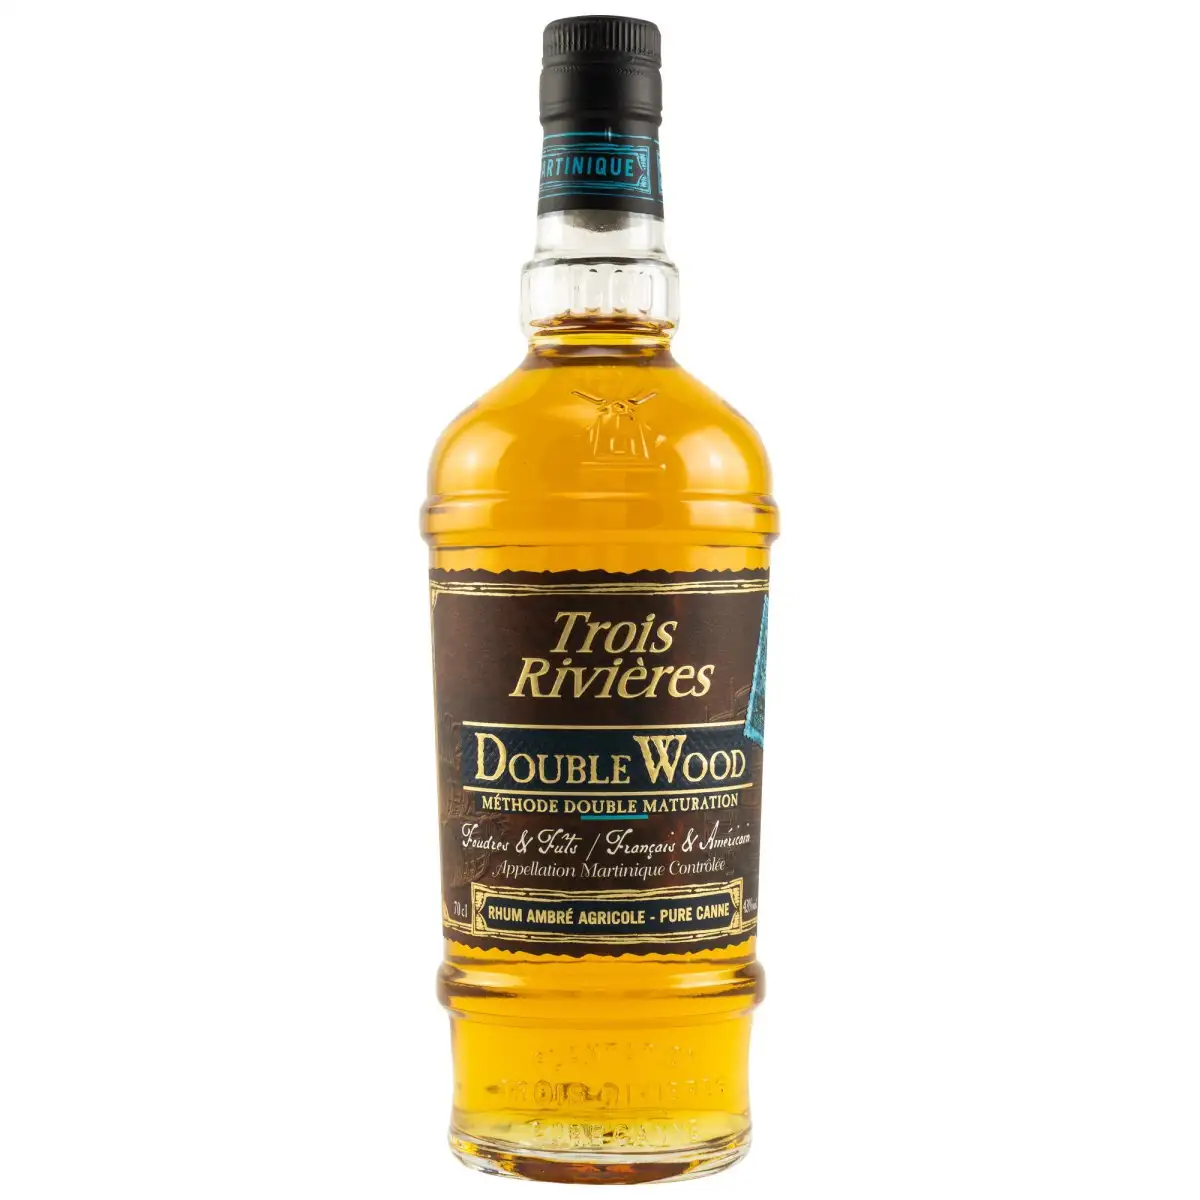 Image of the front of the bottle of the rum Double Wood